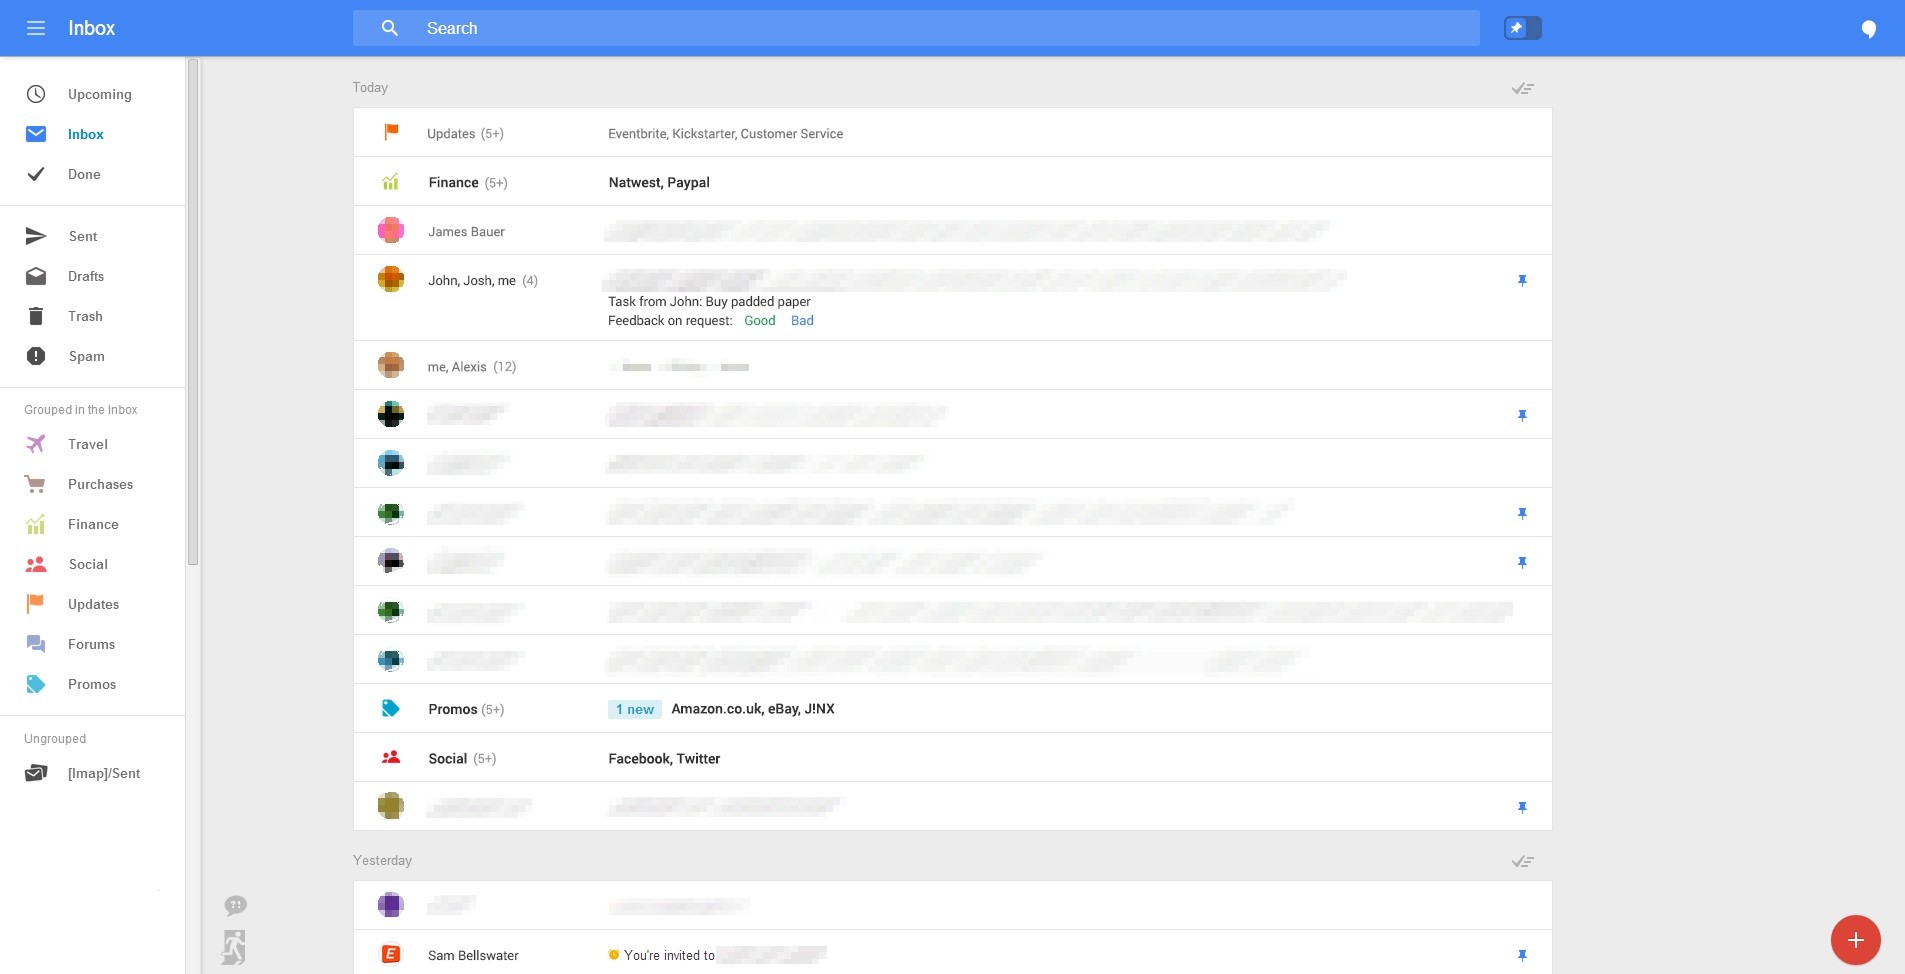 Google-Plans-to-Overhaul-Gmail-New-Design-New-Features-441578-5.jpg